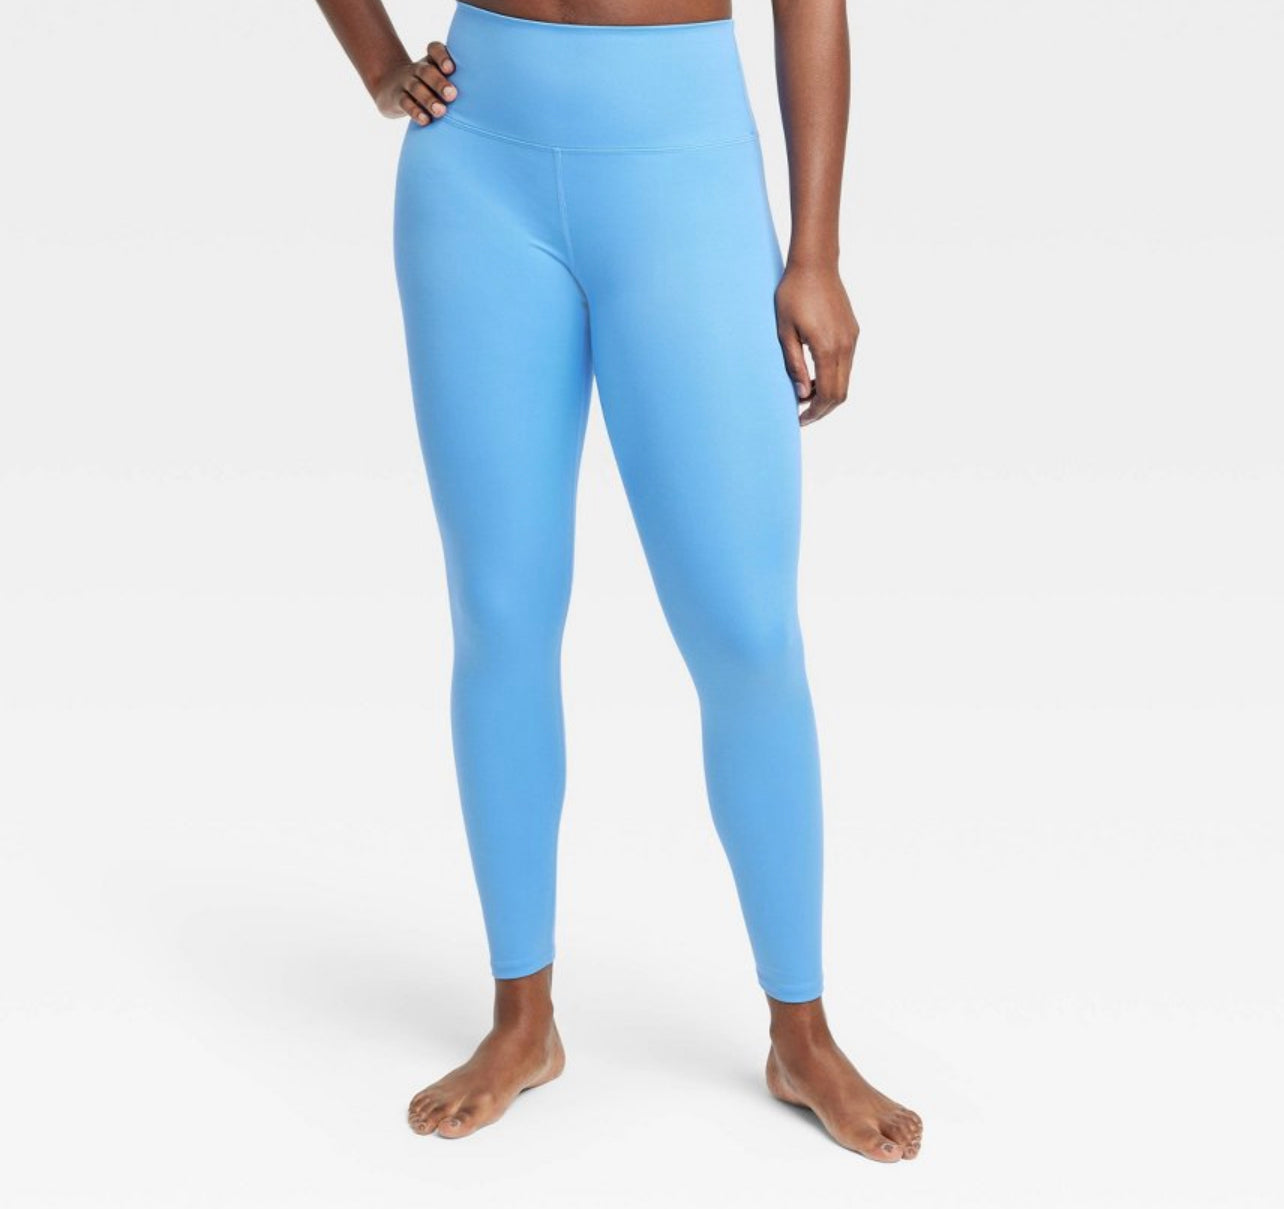 all in motion Multi Color Blue Leggings Size S - 43% off